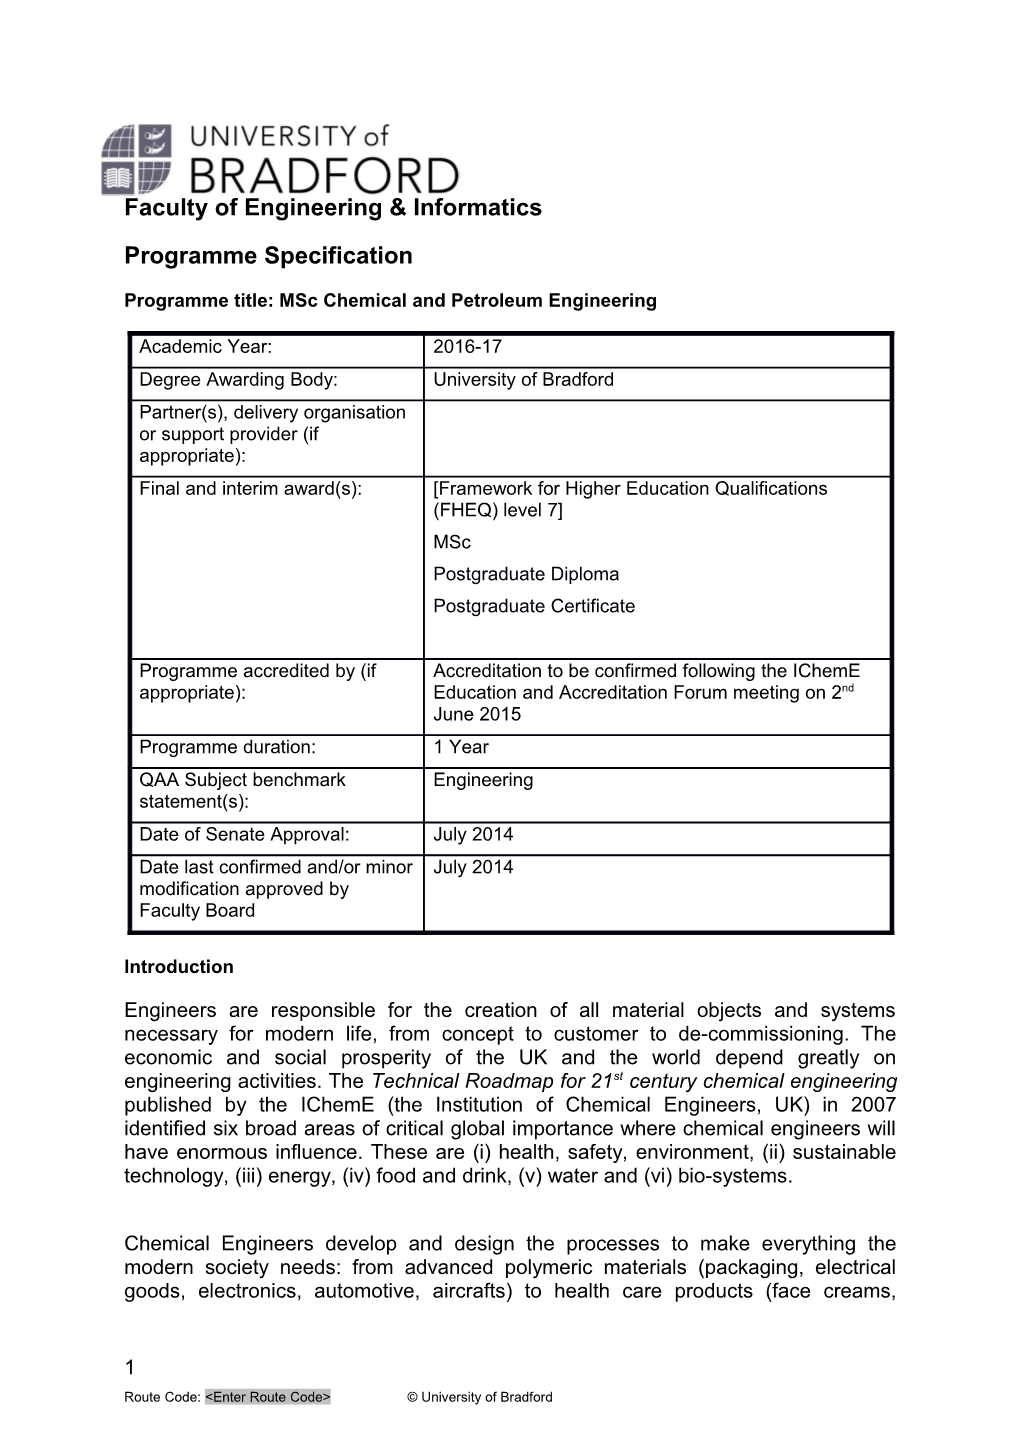 Programme Title: Msc Chemical and Petroleum Engineering